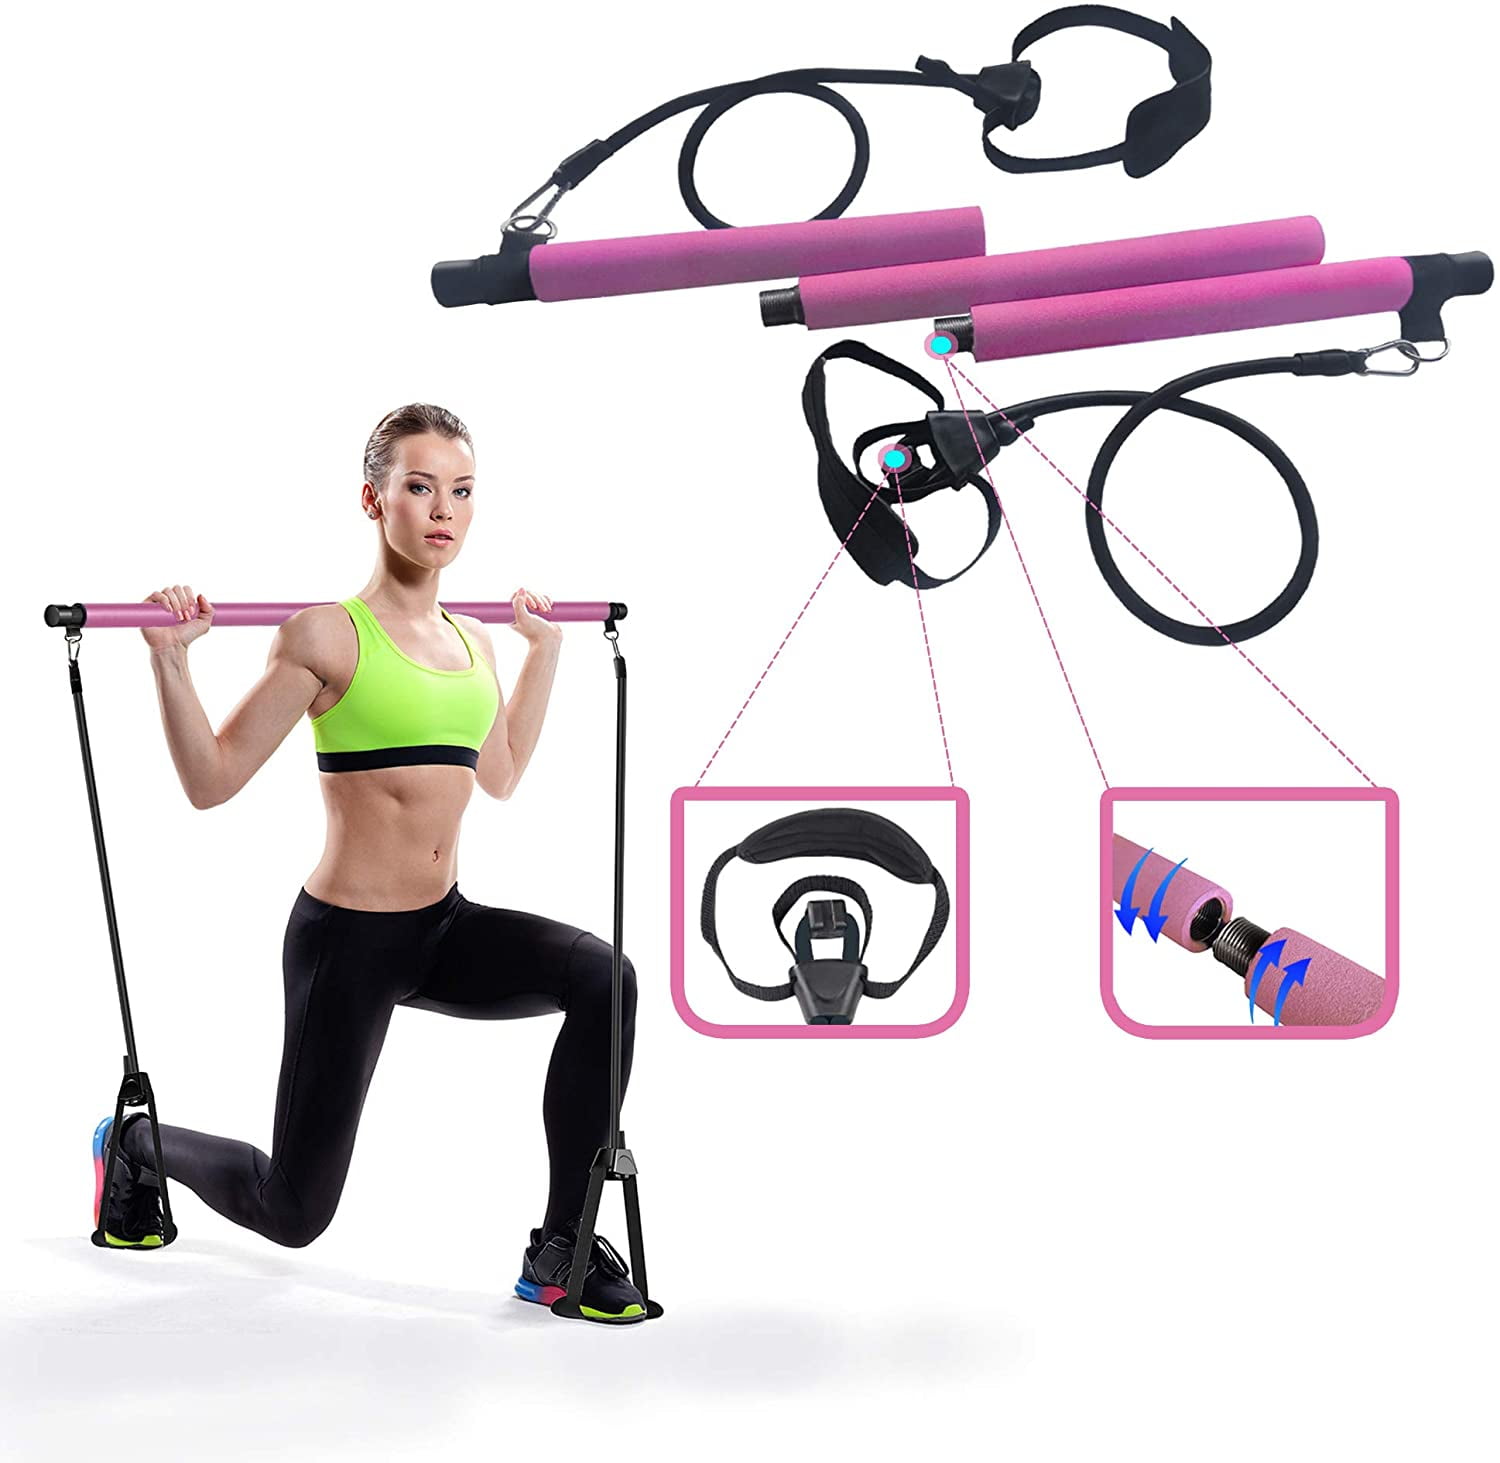 Details about  / Pilates Exercise Stick Fitness Resistance Bands Rope Puller Home Yoga Gym Toning